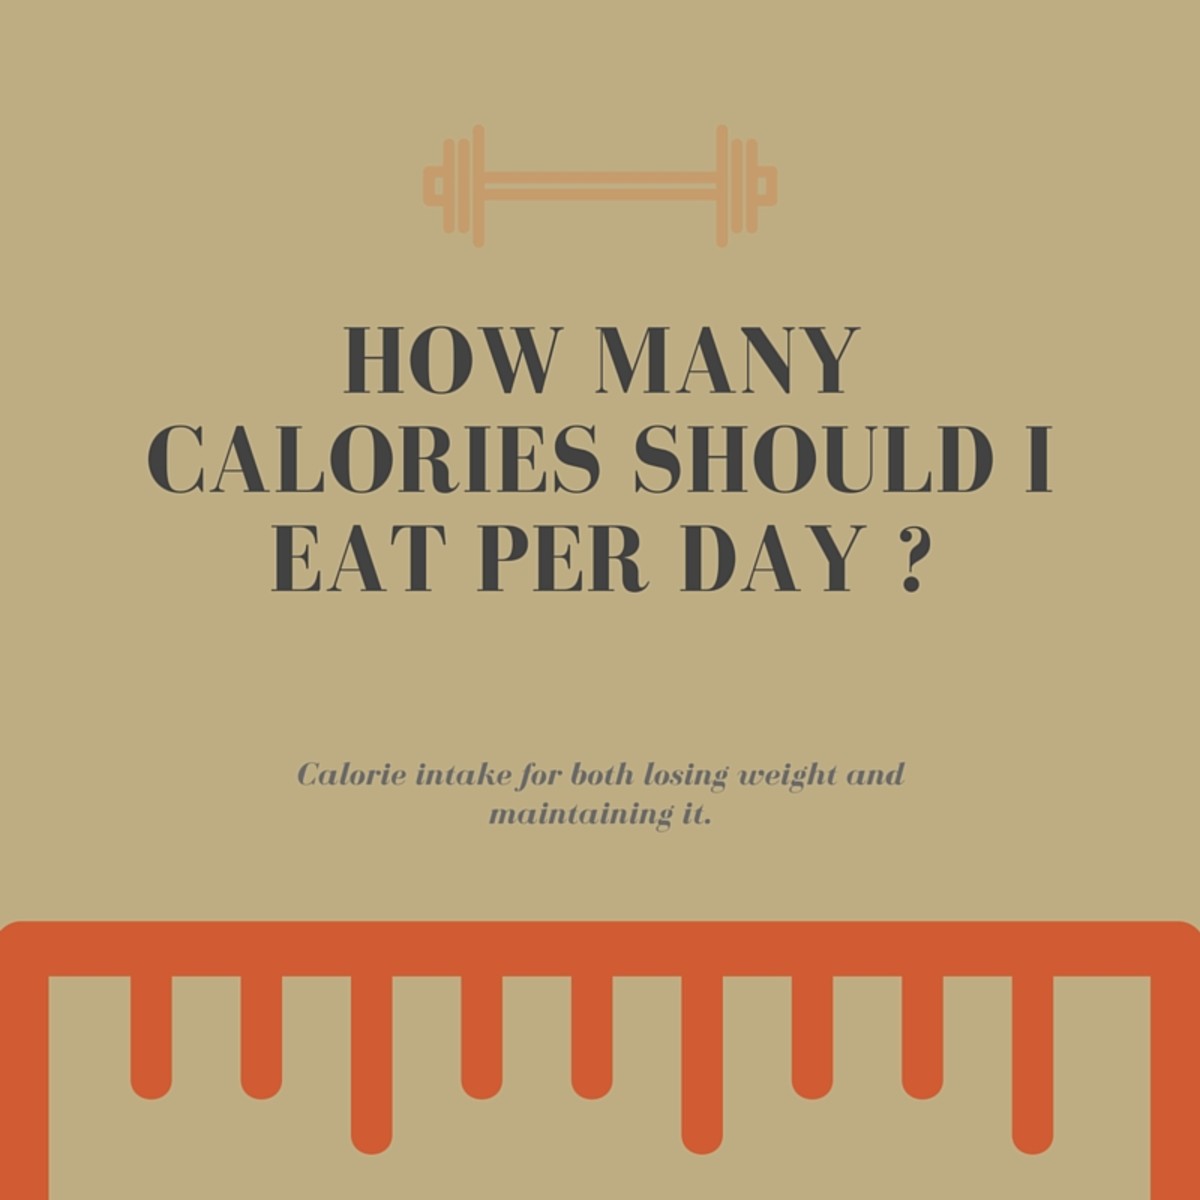 how many calories to lose weight woman